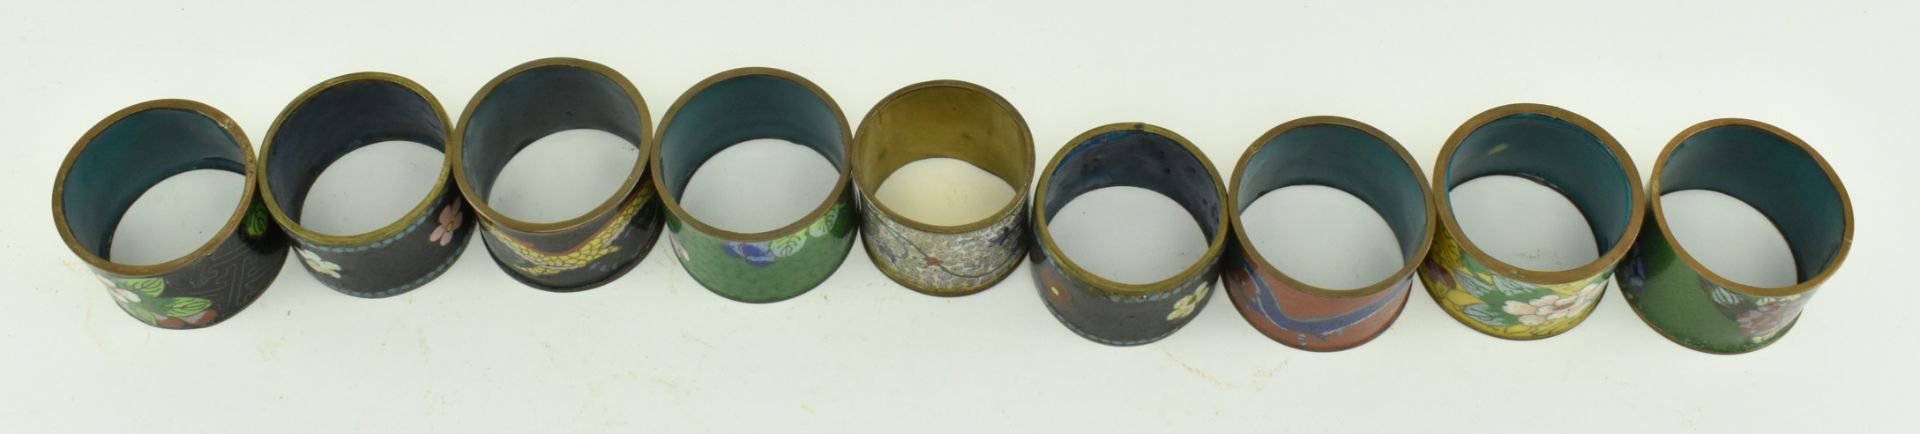 COLLECTION OF 21 CHINESE CLOISONNE BOWLS AND SAUCERS - Image 8 of 8